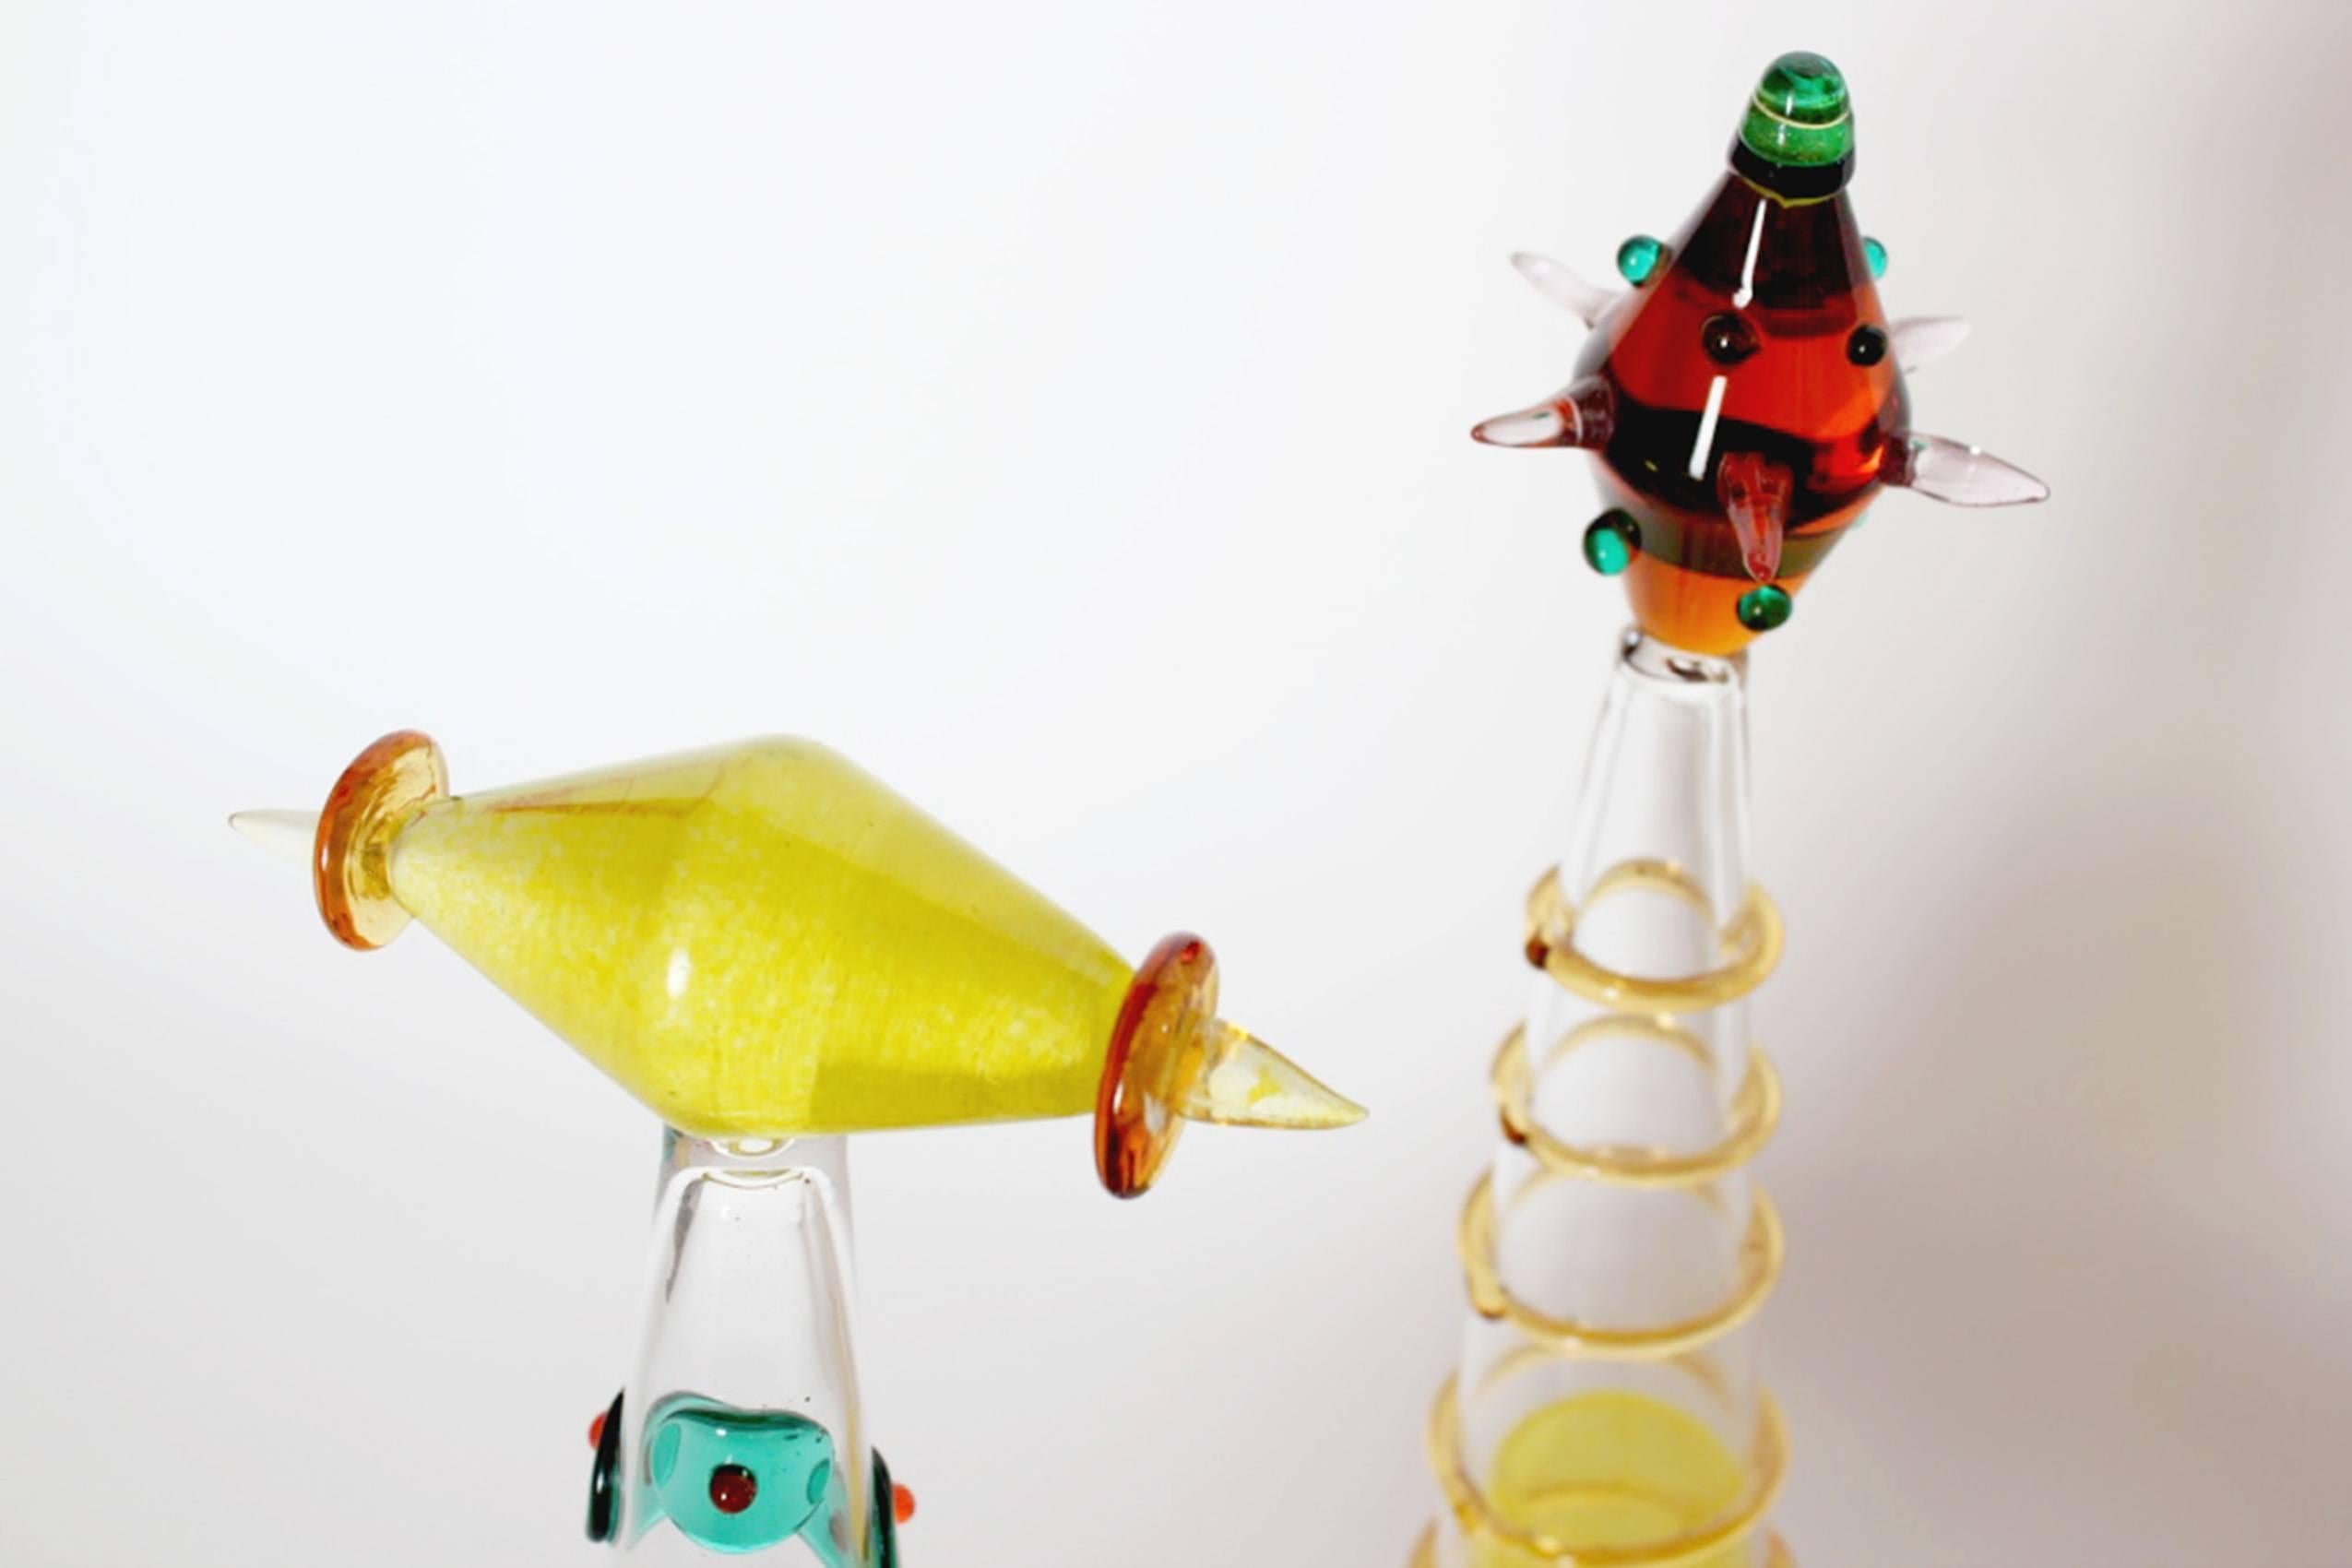 Multicolored handblown Murano glass bottles by Simone Cenedese.
Energetic, graphic and playful contemporary pieces.

Bottles are sold as a set, or for 900 Euros each.




